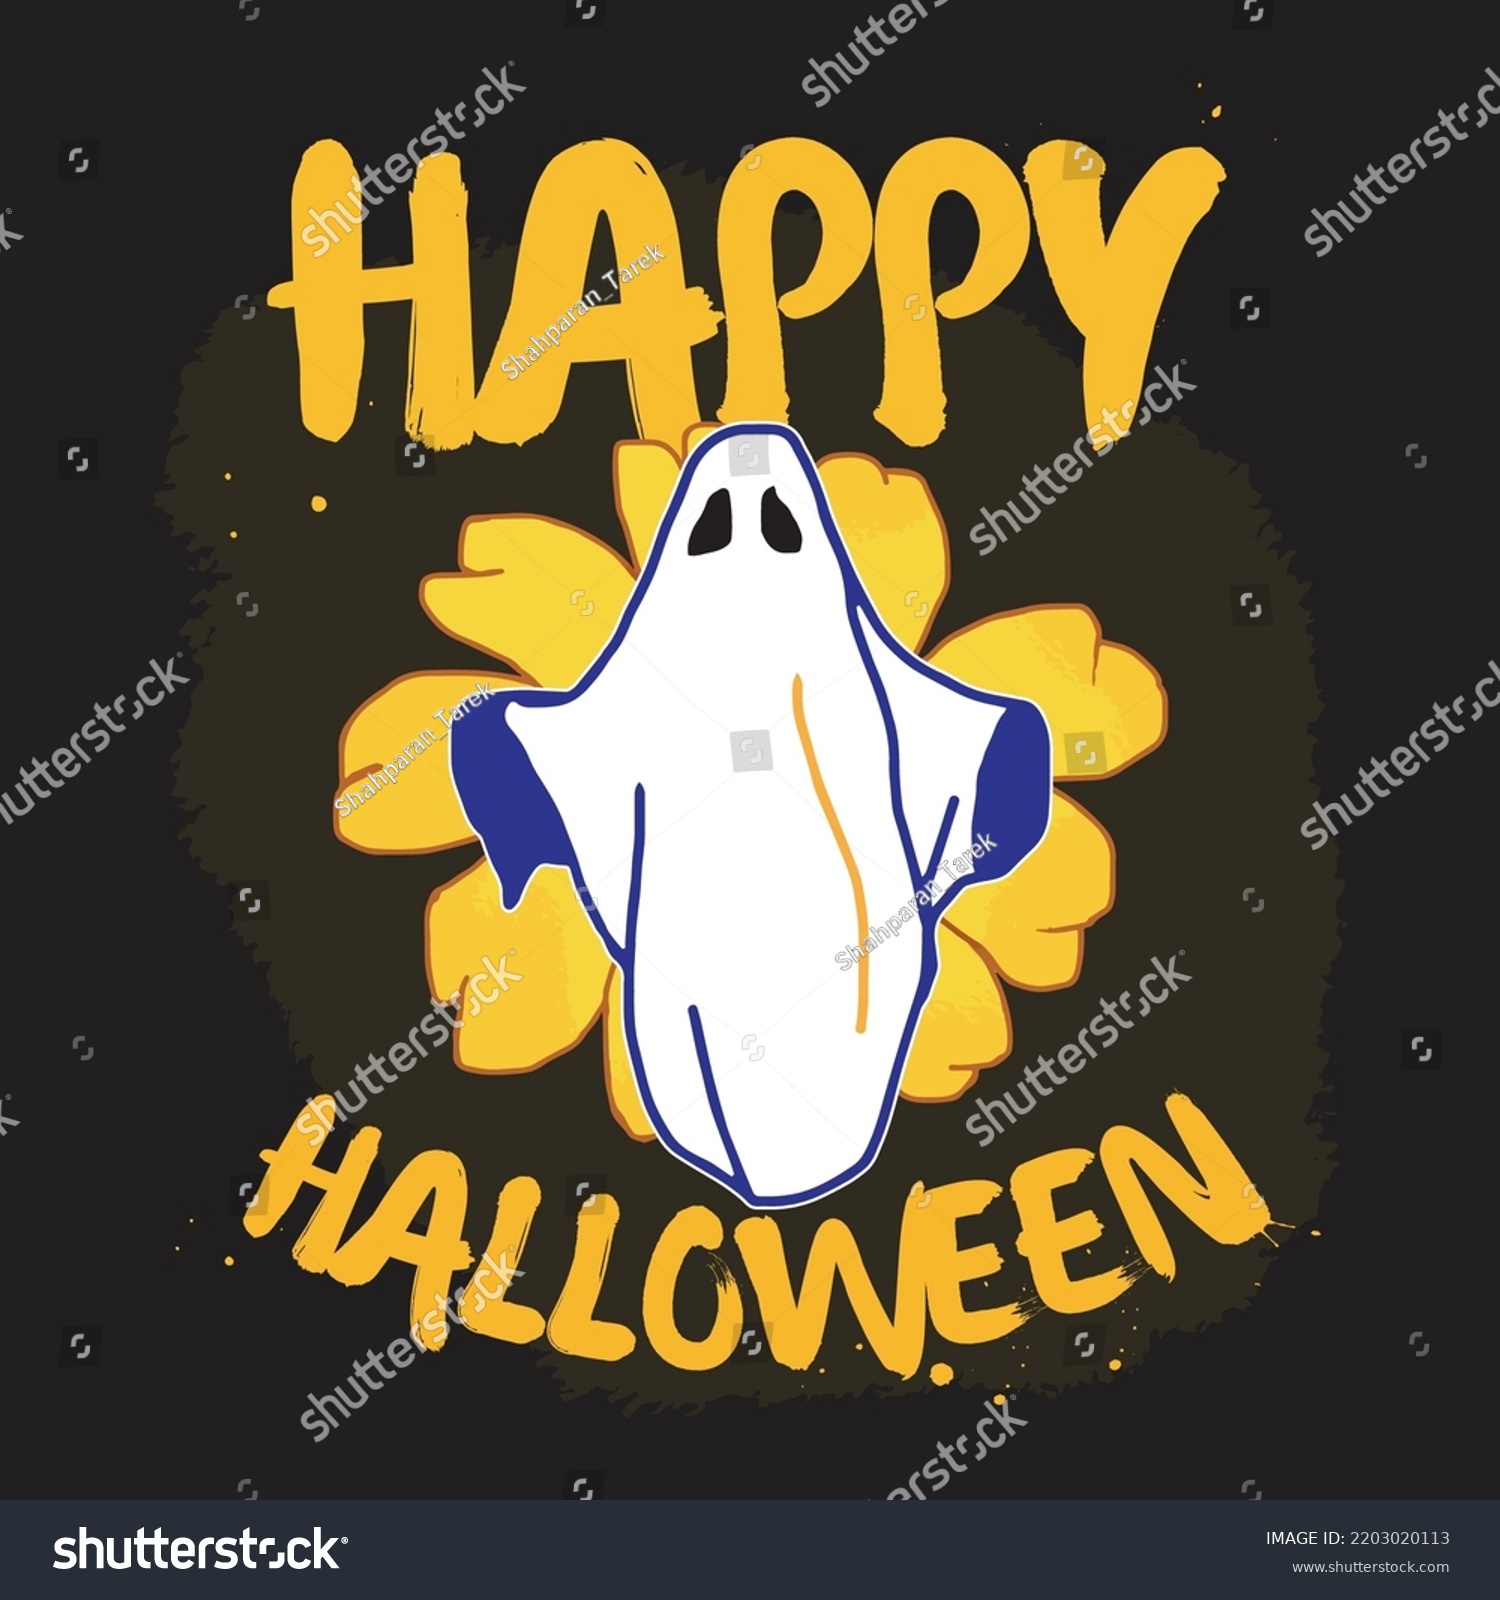 SVG of Halloween t-shirt design.
Halloween t-shirt design for epediomologist. A beautiful design and good quotes will make your project more beautiful.
Anyone can apply this design in various kinds of print. svg